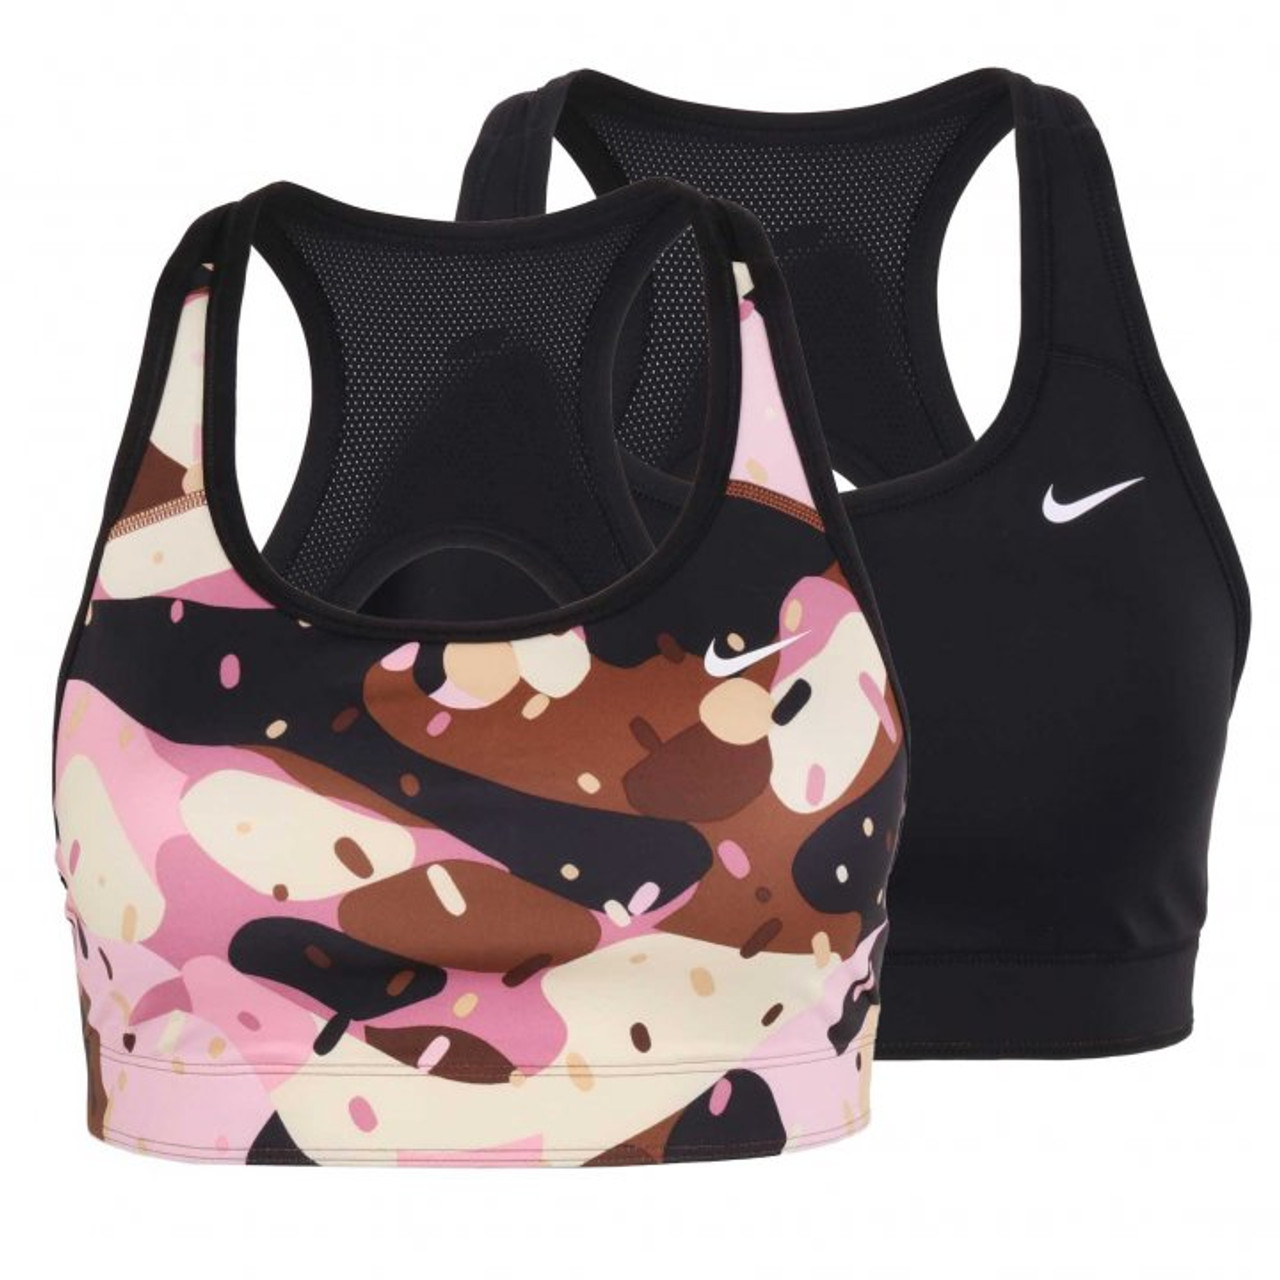 Swoosh Reversible Sports Bra - Teens by Nike Online, THE ICONIC